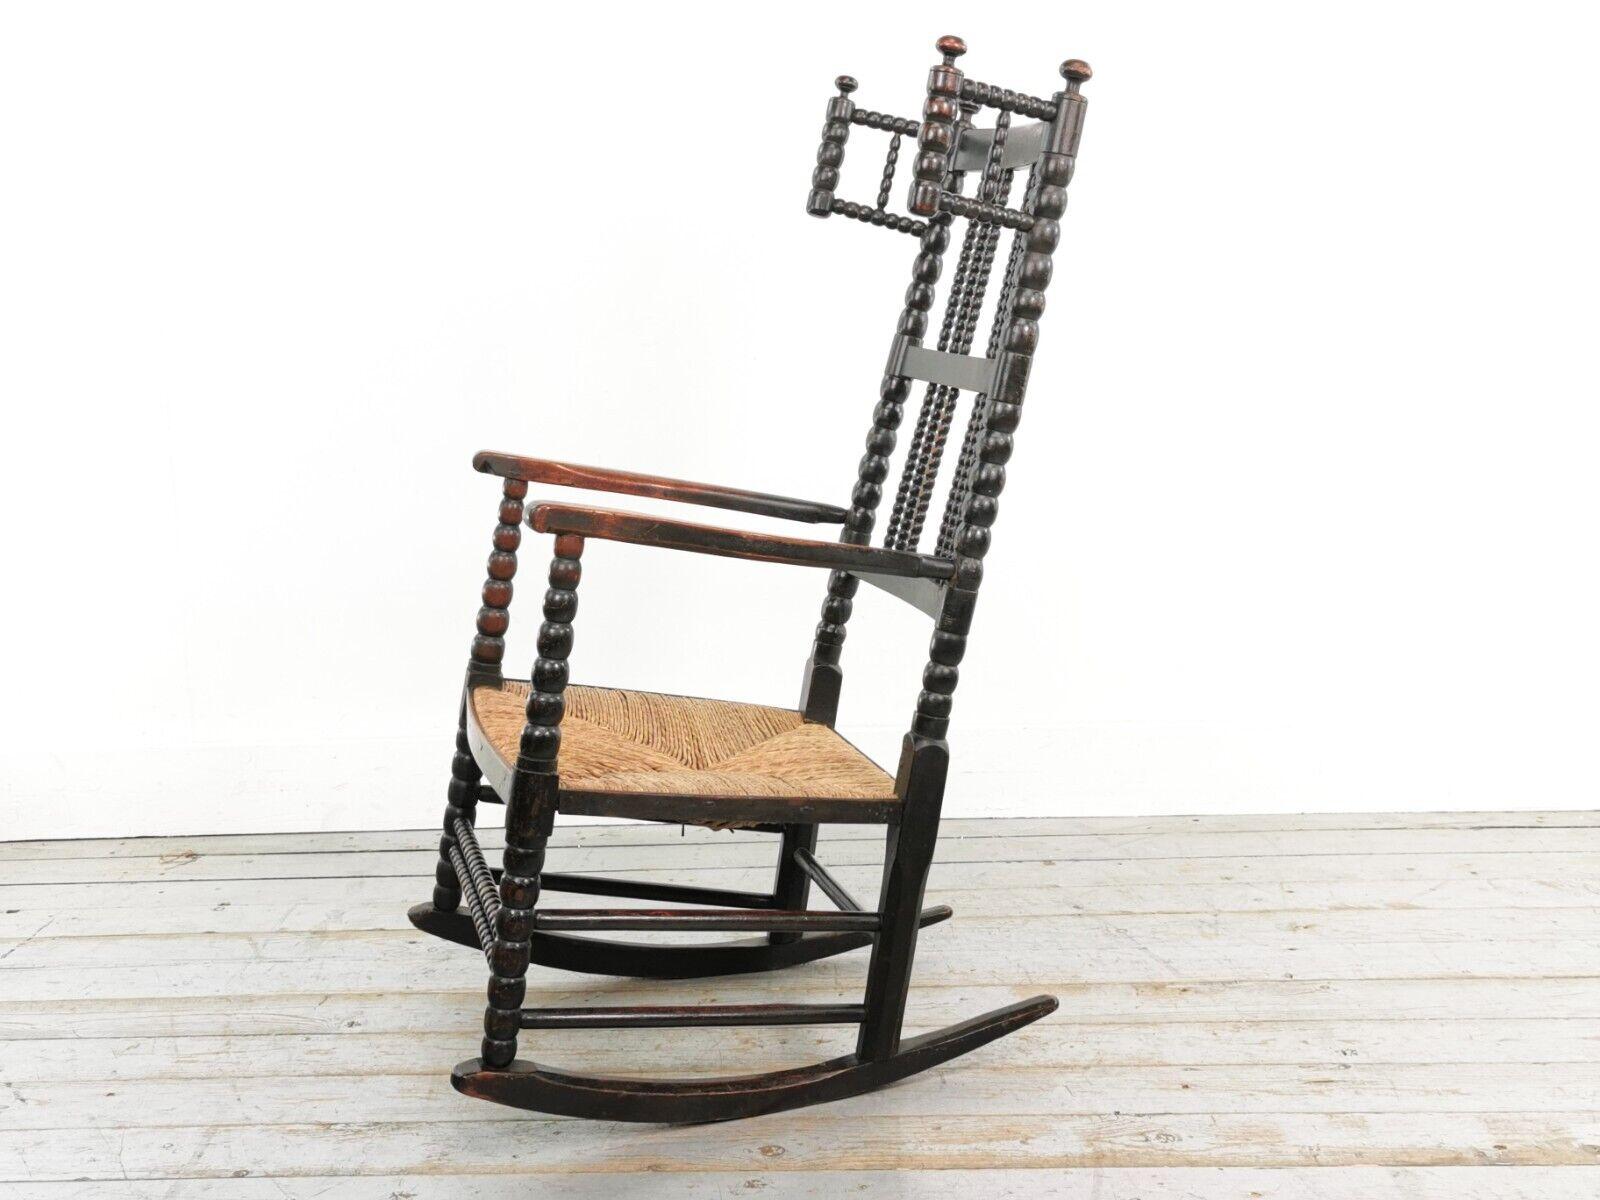 Antique Bobbin rocking chair.

A late 19th century antique arts and crafts bobbin rocking chair. A genuine country-made chair.

Ebonised wooden frame with a rush seat.

A charming chair in very good antique condition, the ebonised paint has